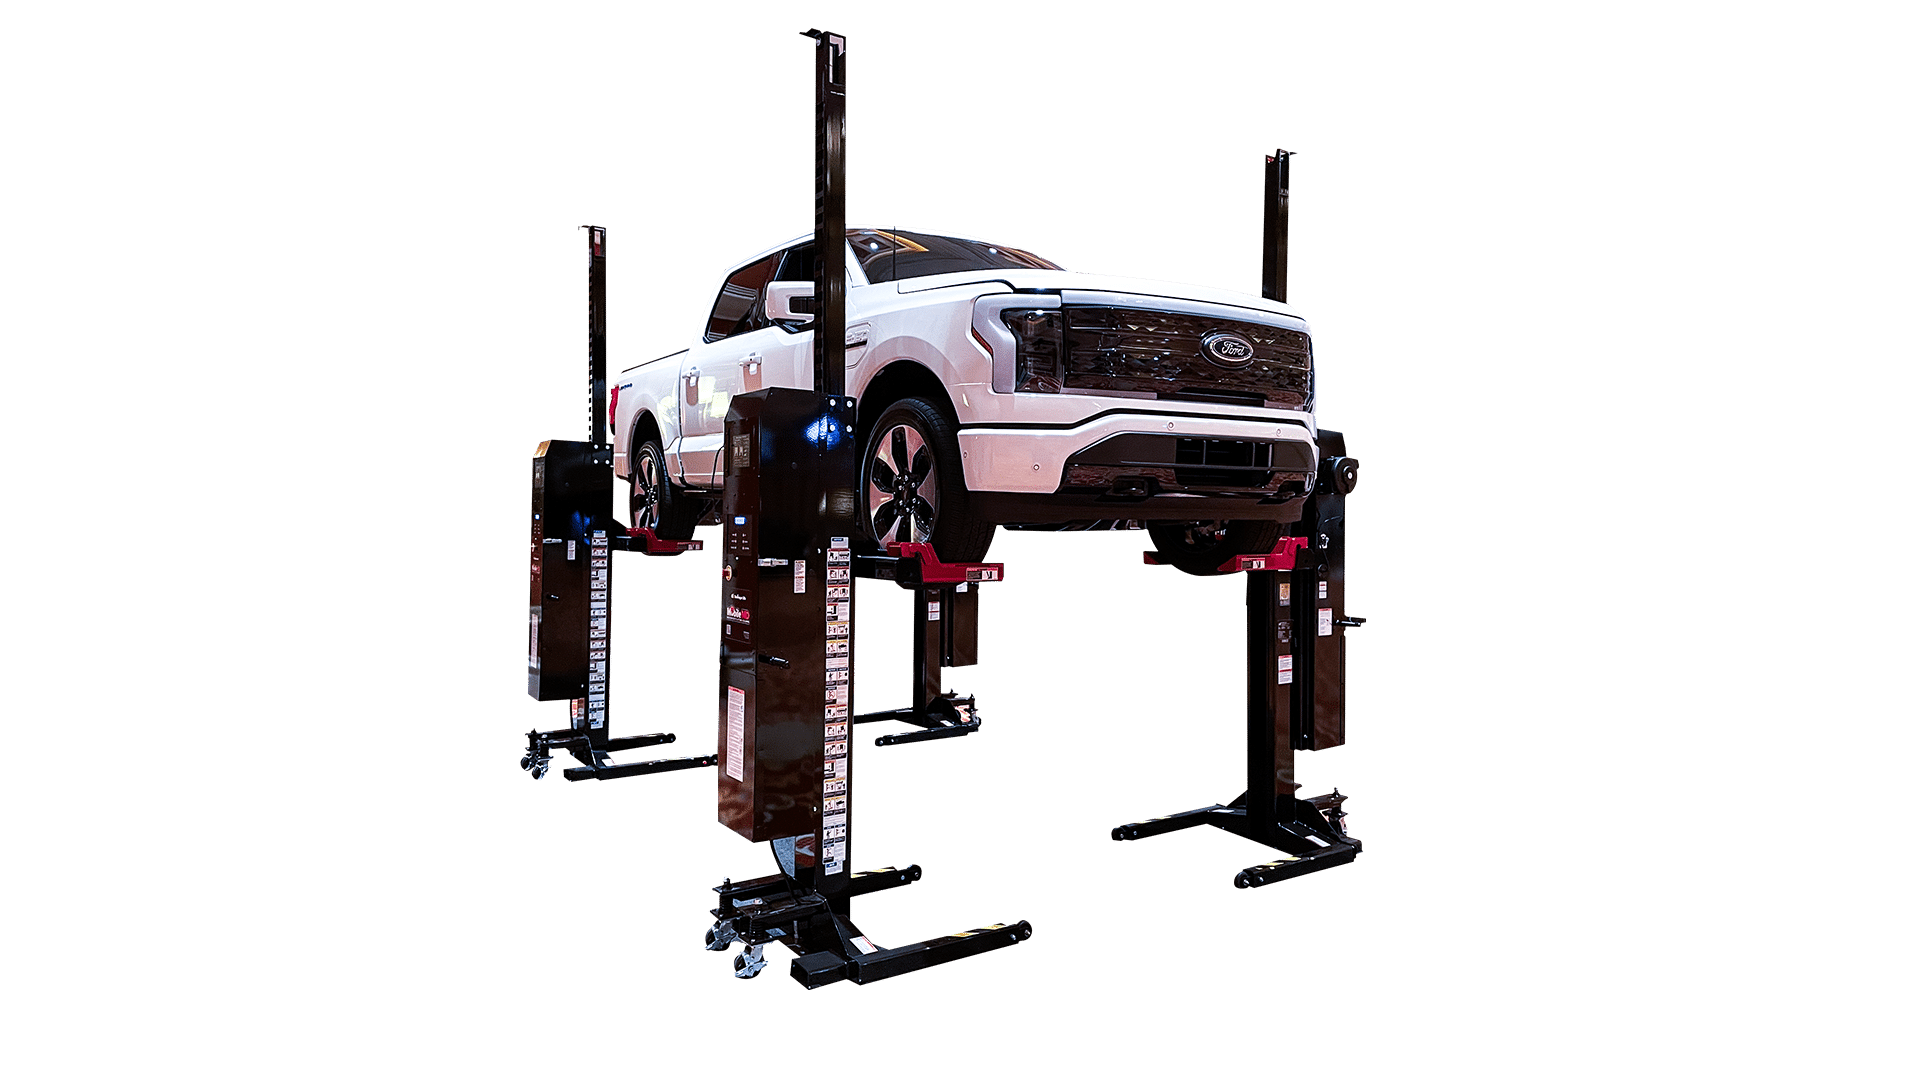 Challenger's medium-duty mobile column lifting system allows you to lift any rubber-tired vehicle, with a maximum lifting capacity of up to 20,000 lbs. With wireless connectivity and heavy-duty tow handles, lift any vehicle with ease using this maneuverable lifting system.